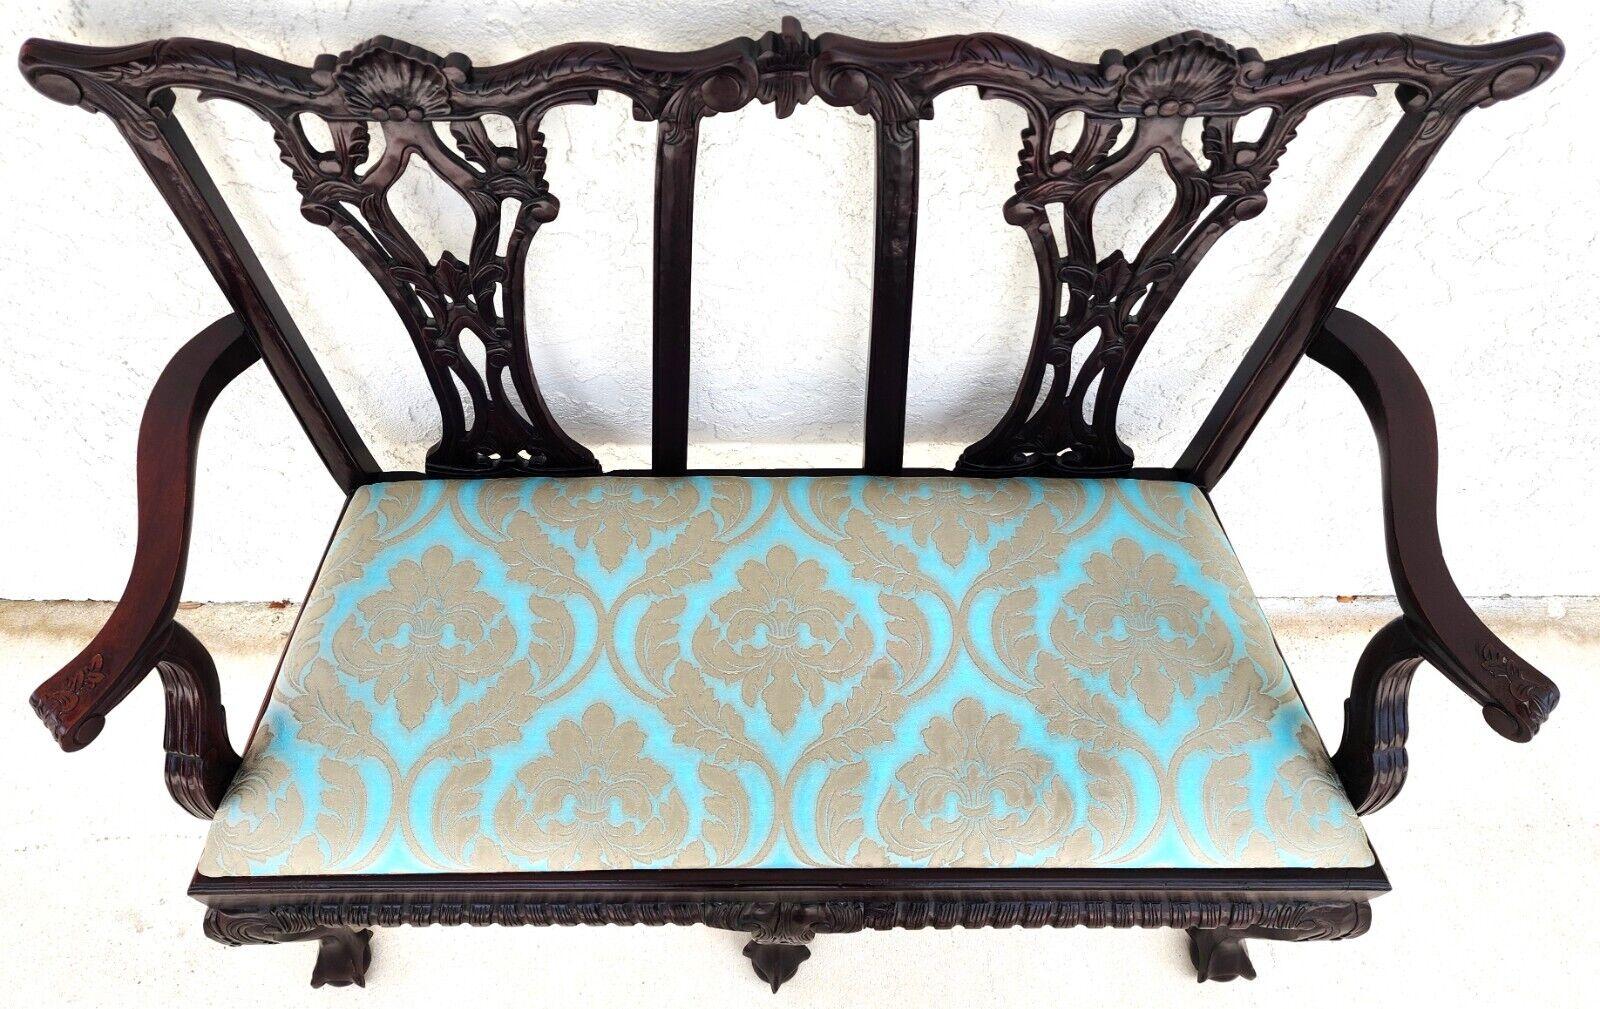 For FULL item description click on CONTINUE READING at the bottom of this page.
Offering One of Our Recent Palm Beach Estate fine Furniture Acquisitions of a
Vintage Chippendale Style Bench or Settee
Main color is Aqua or Turquoise.
Approximate